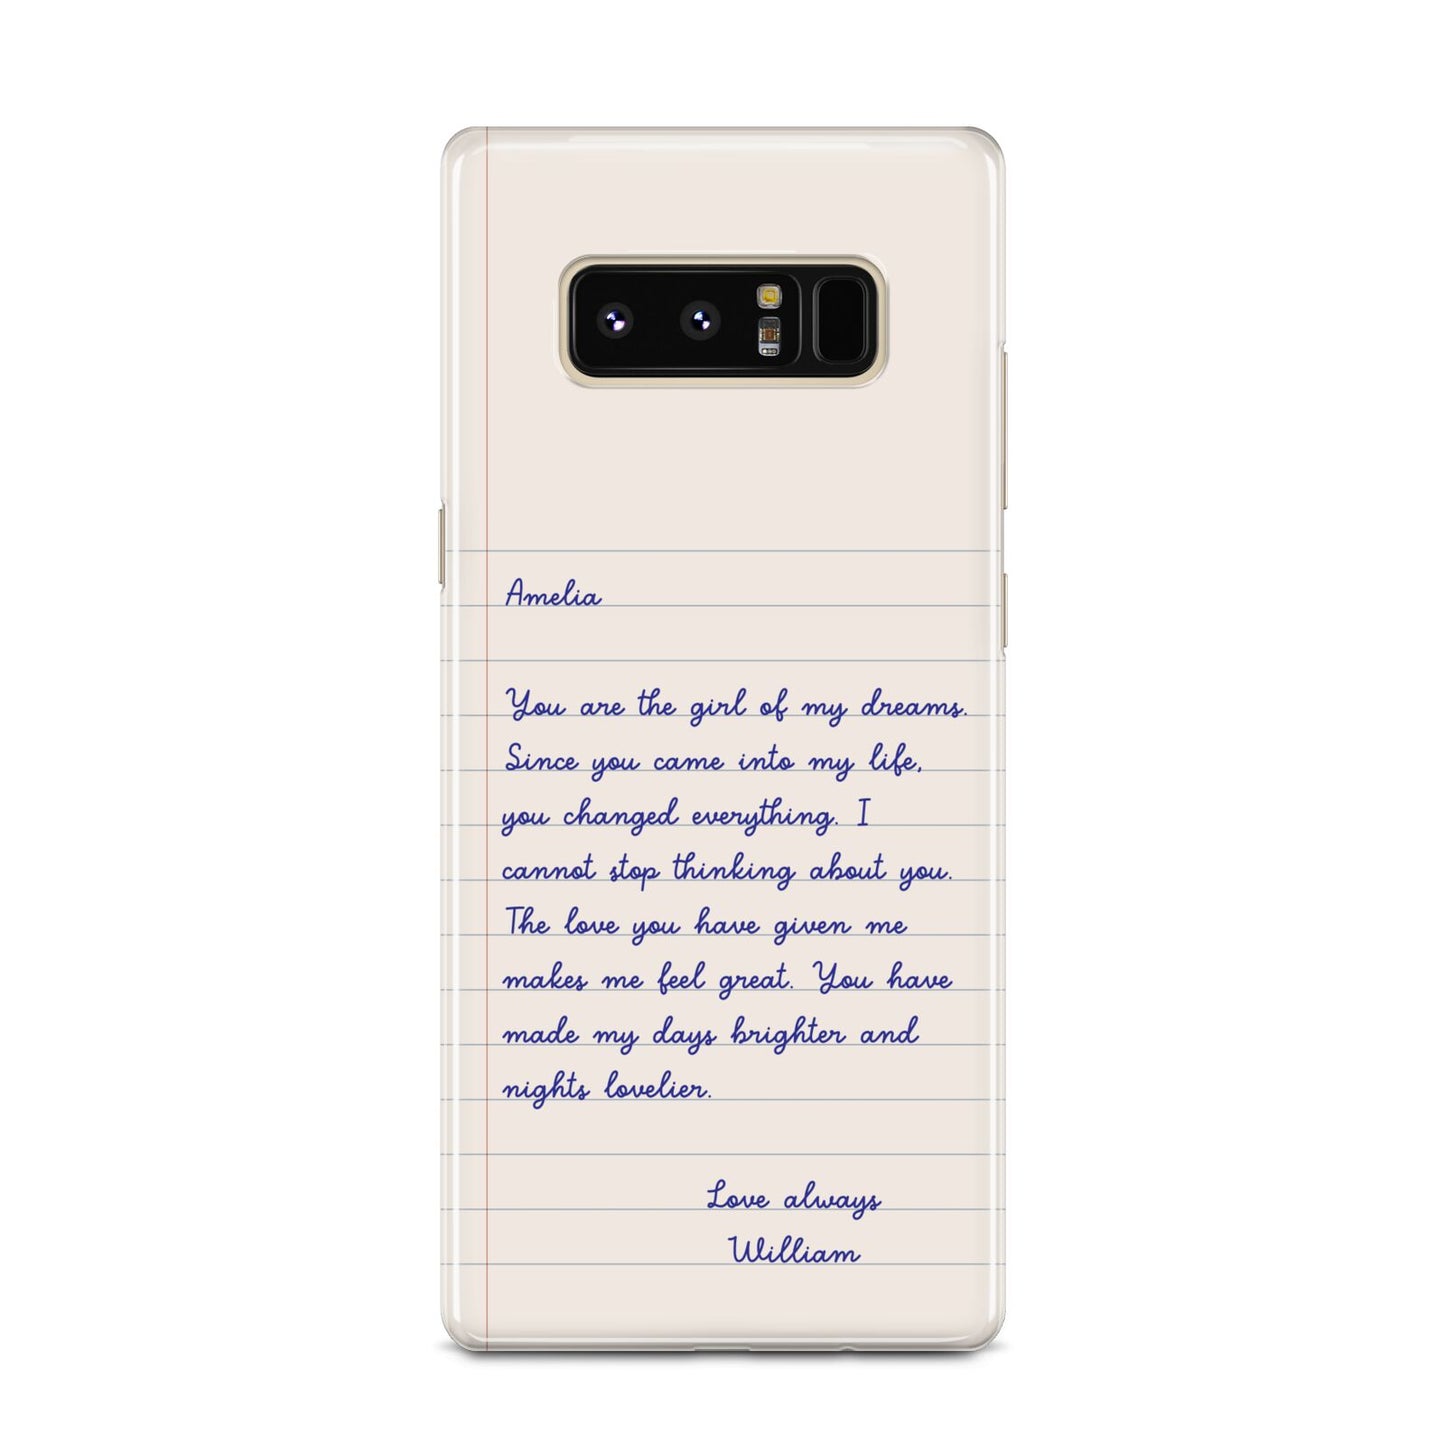 Personalised Love Letter Samsung Galaxy Note 8 Case